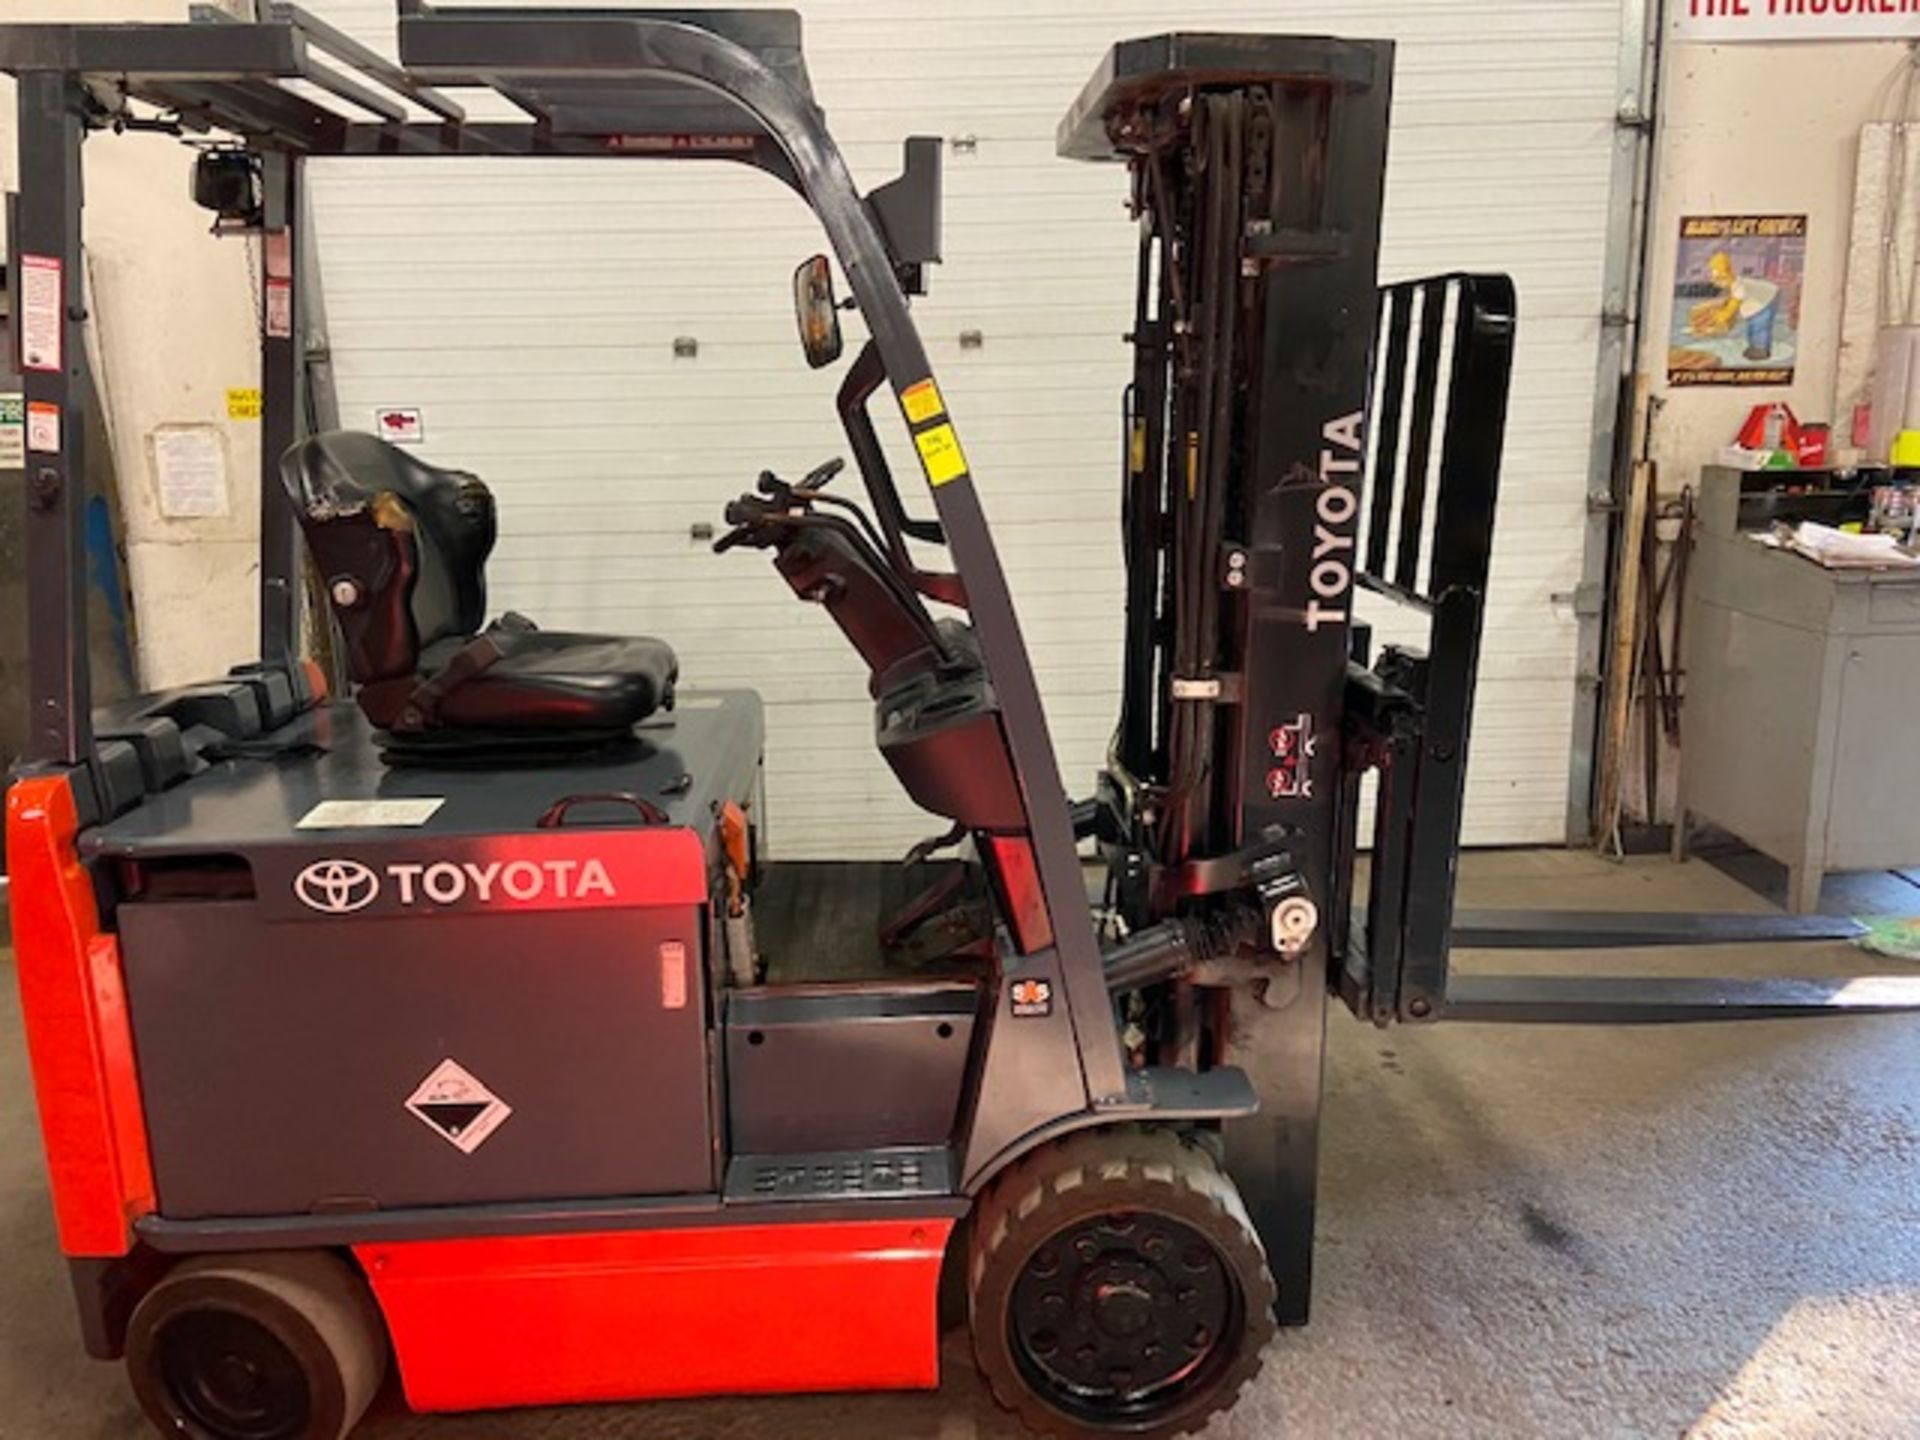 FREE CUSTOMS - 2014 Toyota 6000lbs Electric Forklift with sideshift and 3-stage mast 36V - Image 3 of 3